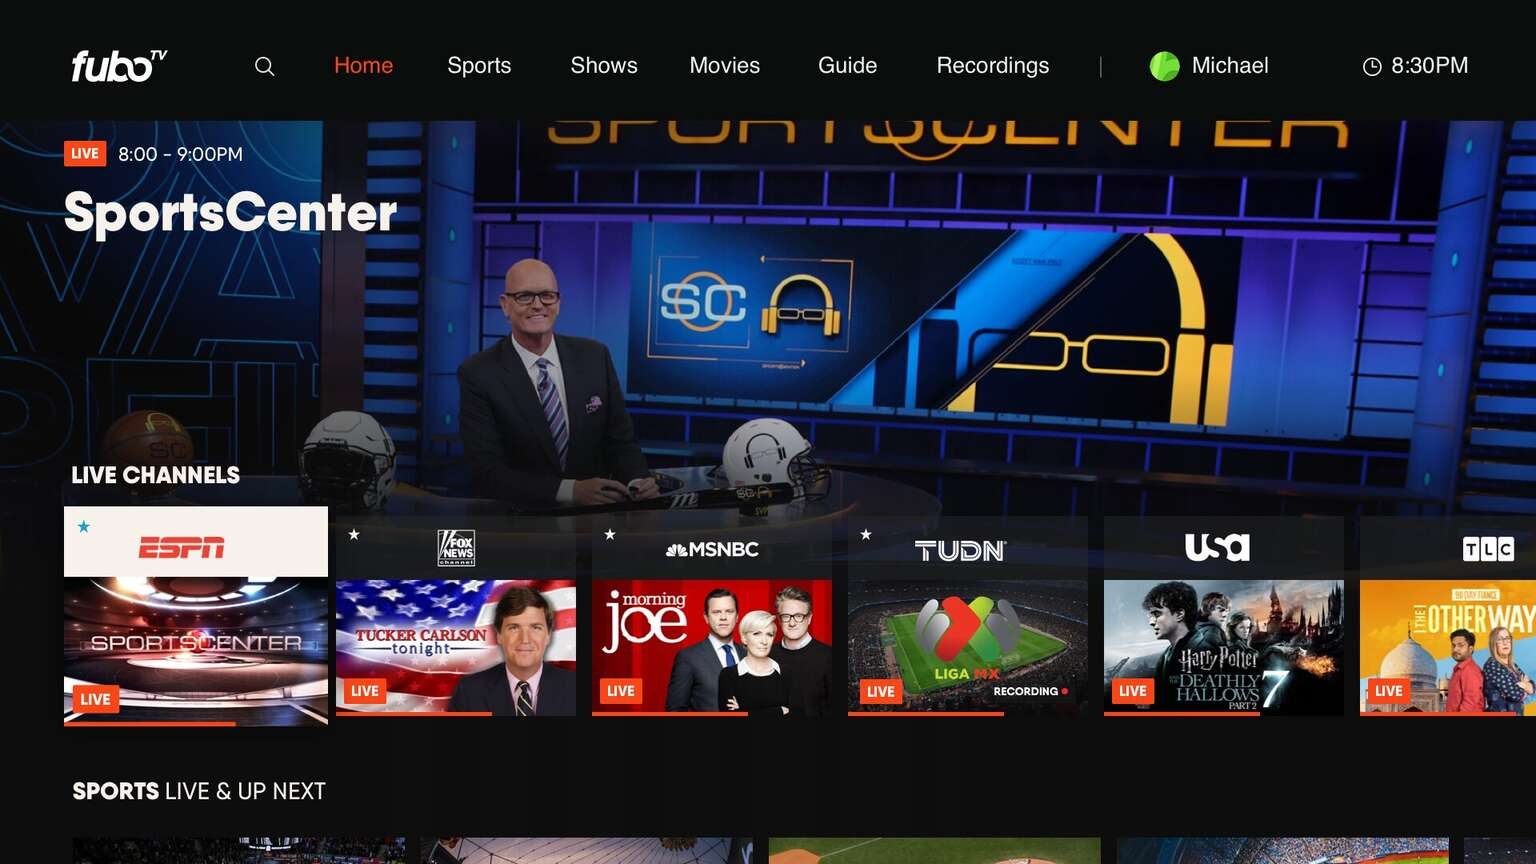 fuboTV is Offering an Extended 2Week Free Trial For New Subscribers